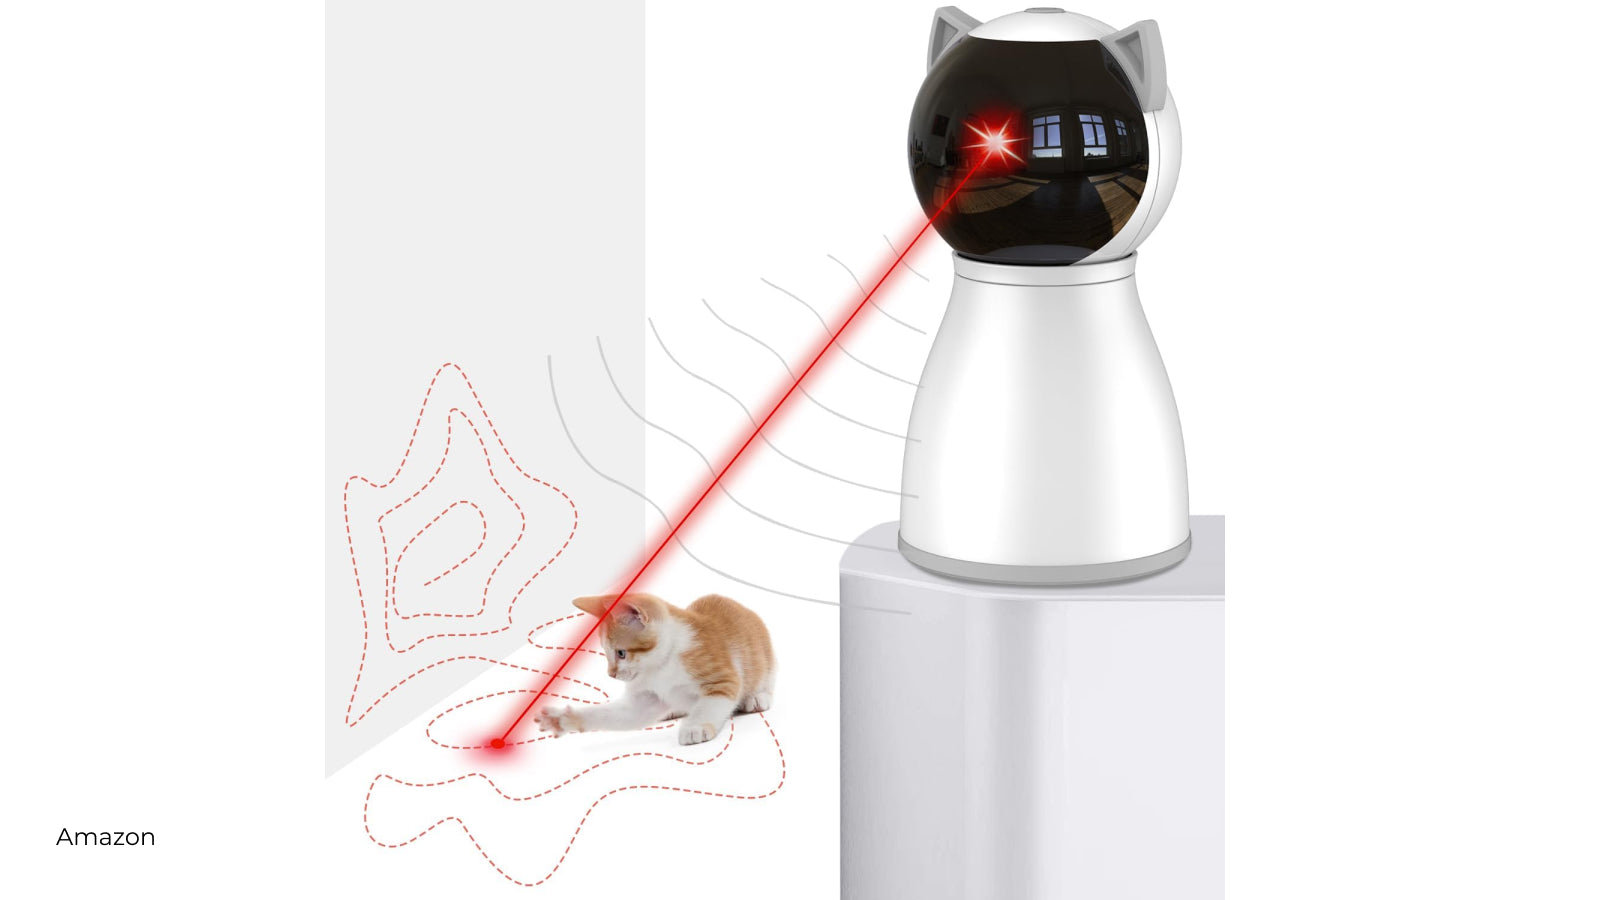 A beige and white cat plays with a laser projected from a cat shape device